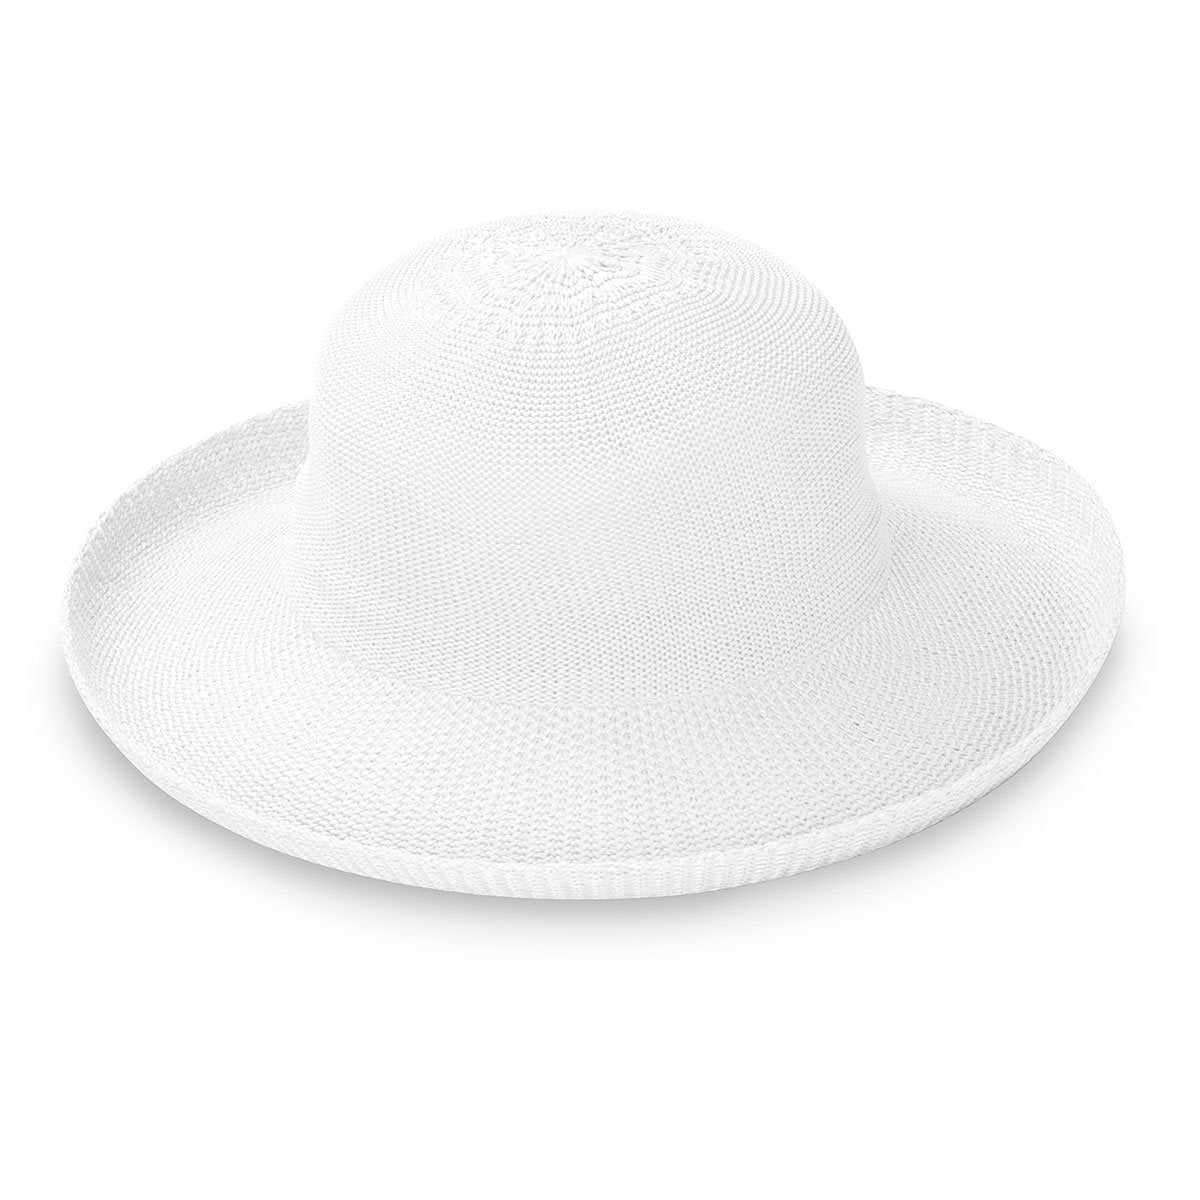 Featuring Ladies' Big Wide Brim Style Victoria poly straw Sun Hat in White from Wallaroo